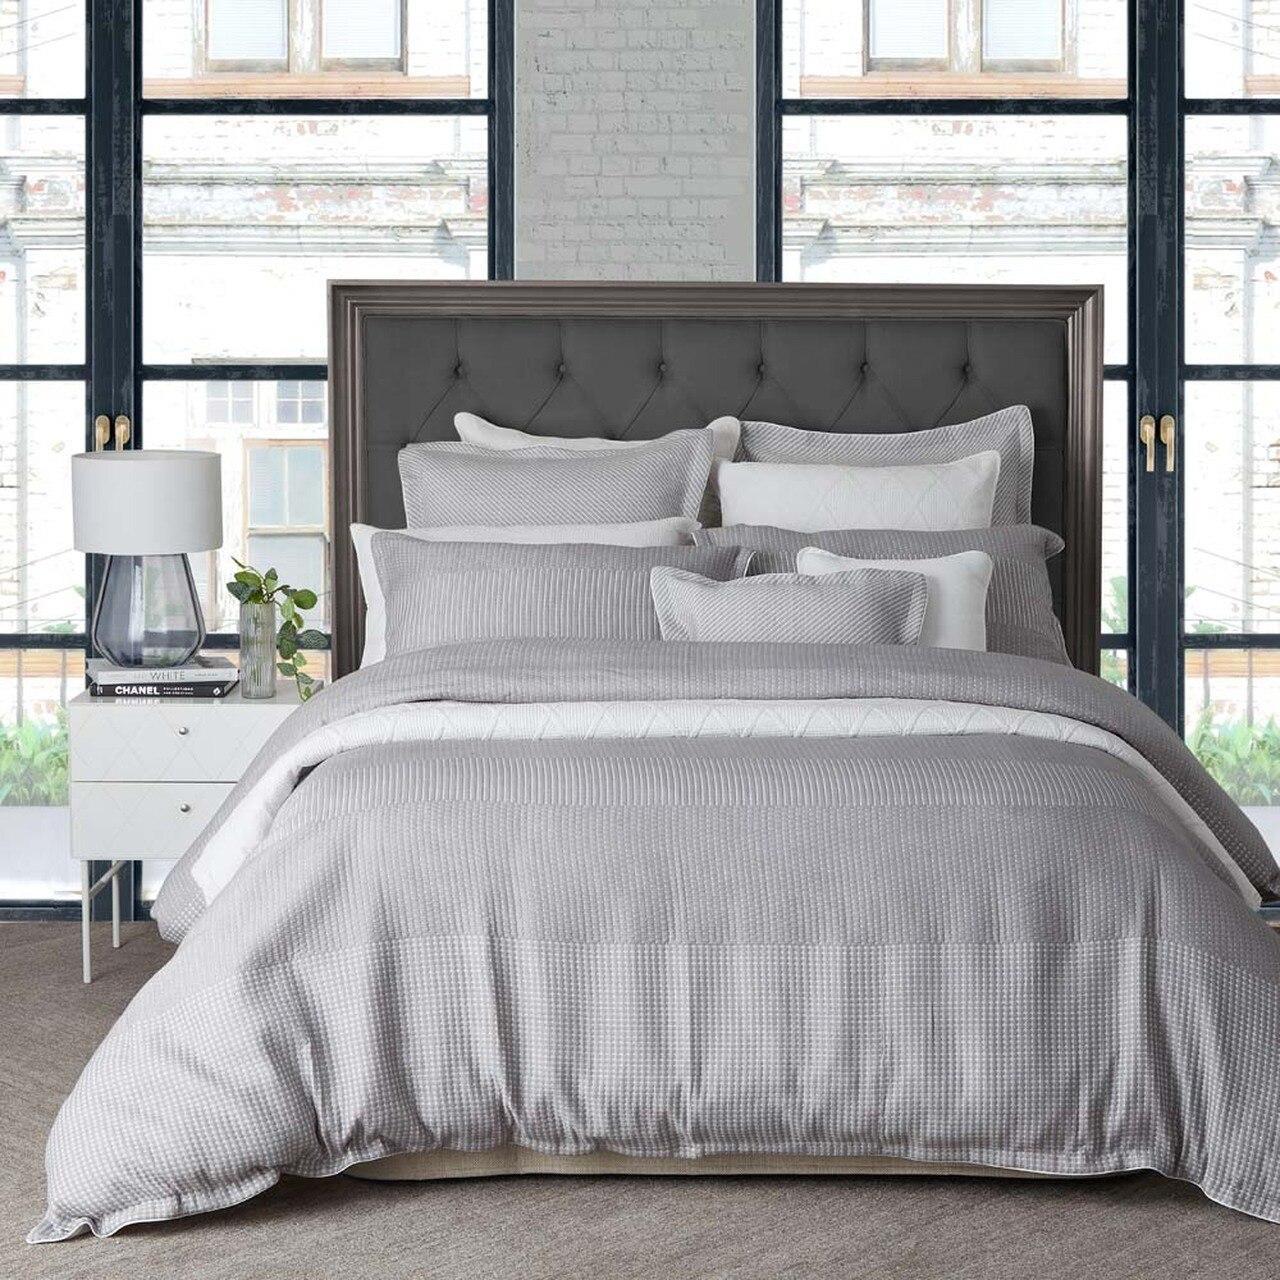 Private collection Tier Silver Duvet Doona Quilt Cover Set - King Size